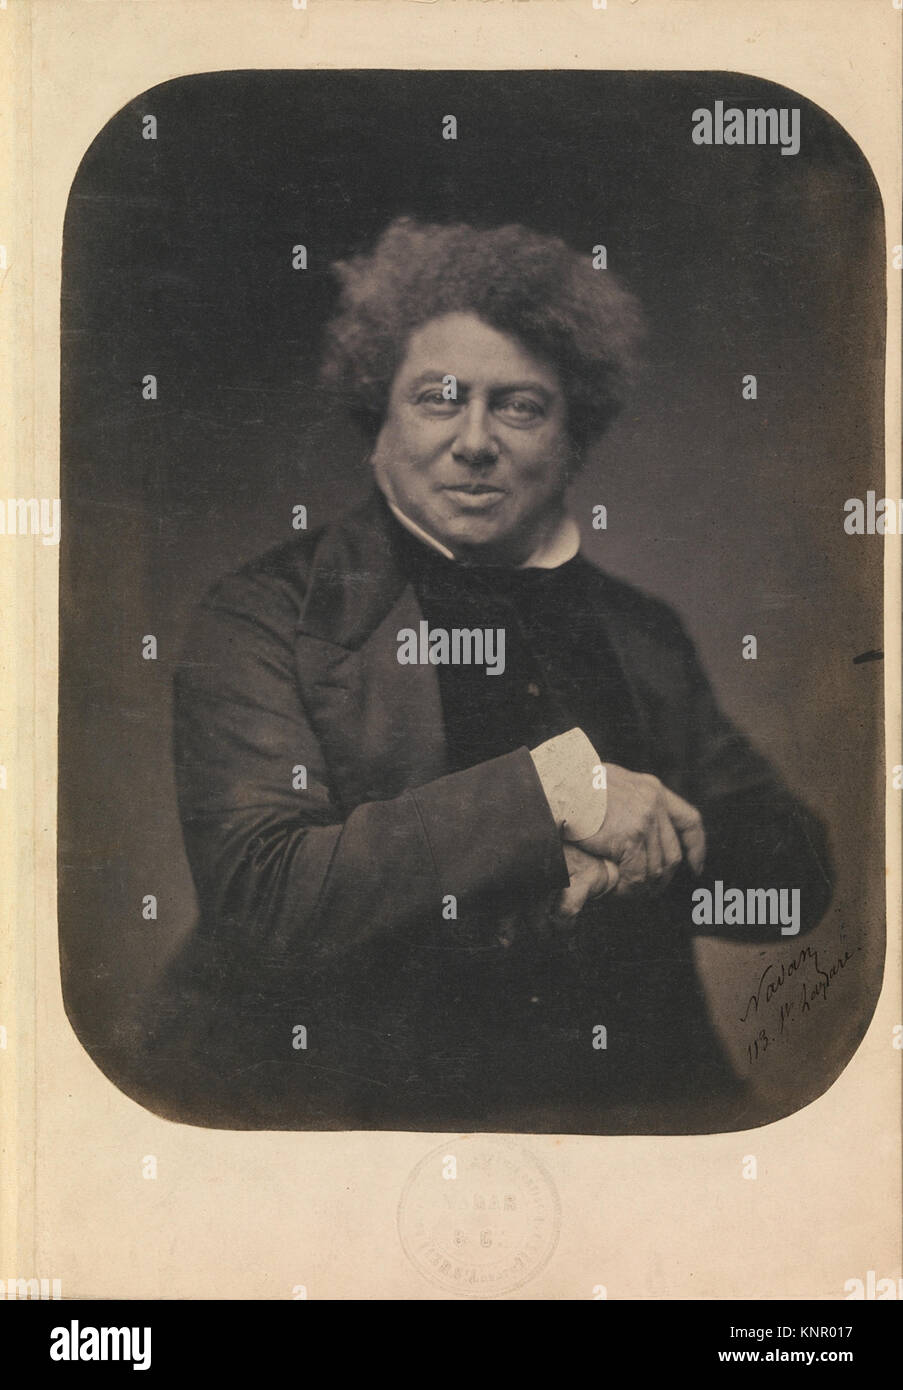 -Album Containing Photographs, Engravings, Drawings, and Publications Pertaining to Alexandre Dumas- MET DP279886 283117 Stock Photo